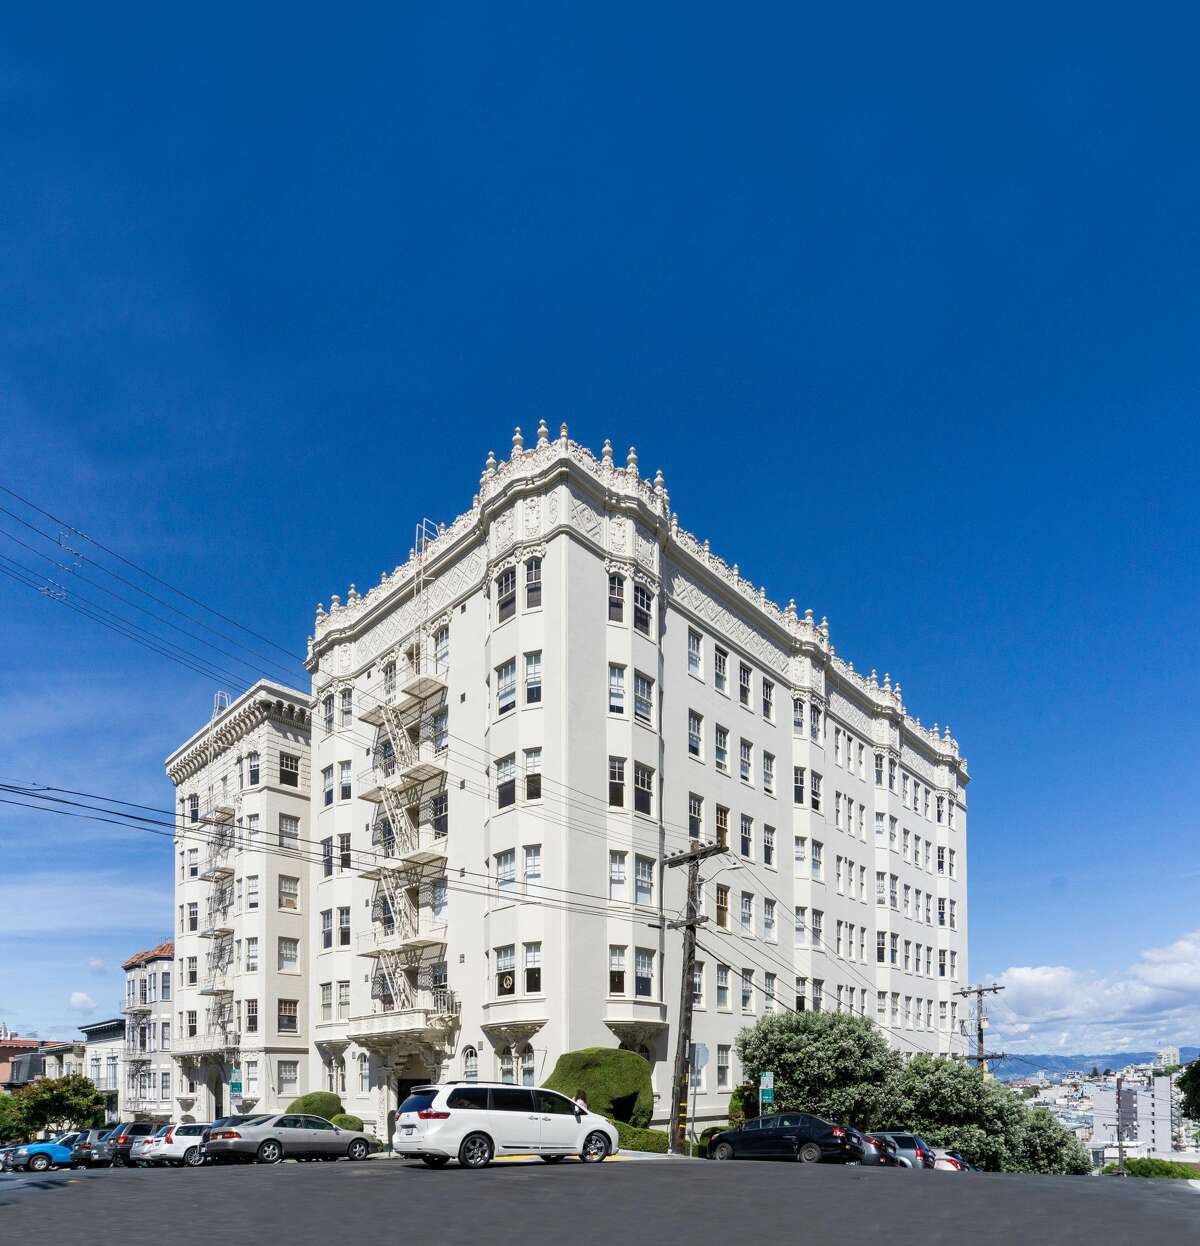 Breaking all records for this neighborhood is the sale of these trophy apartment buildings in Russian Hill